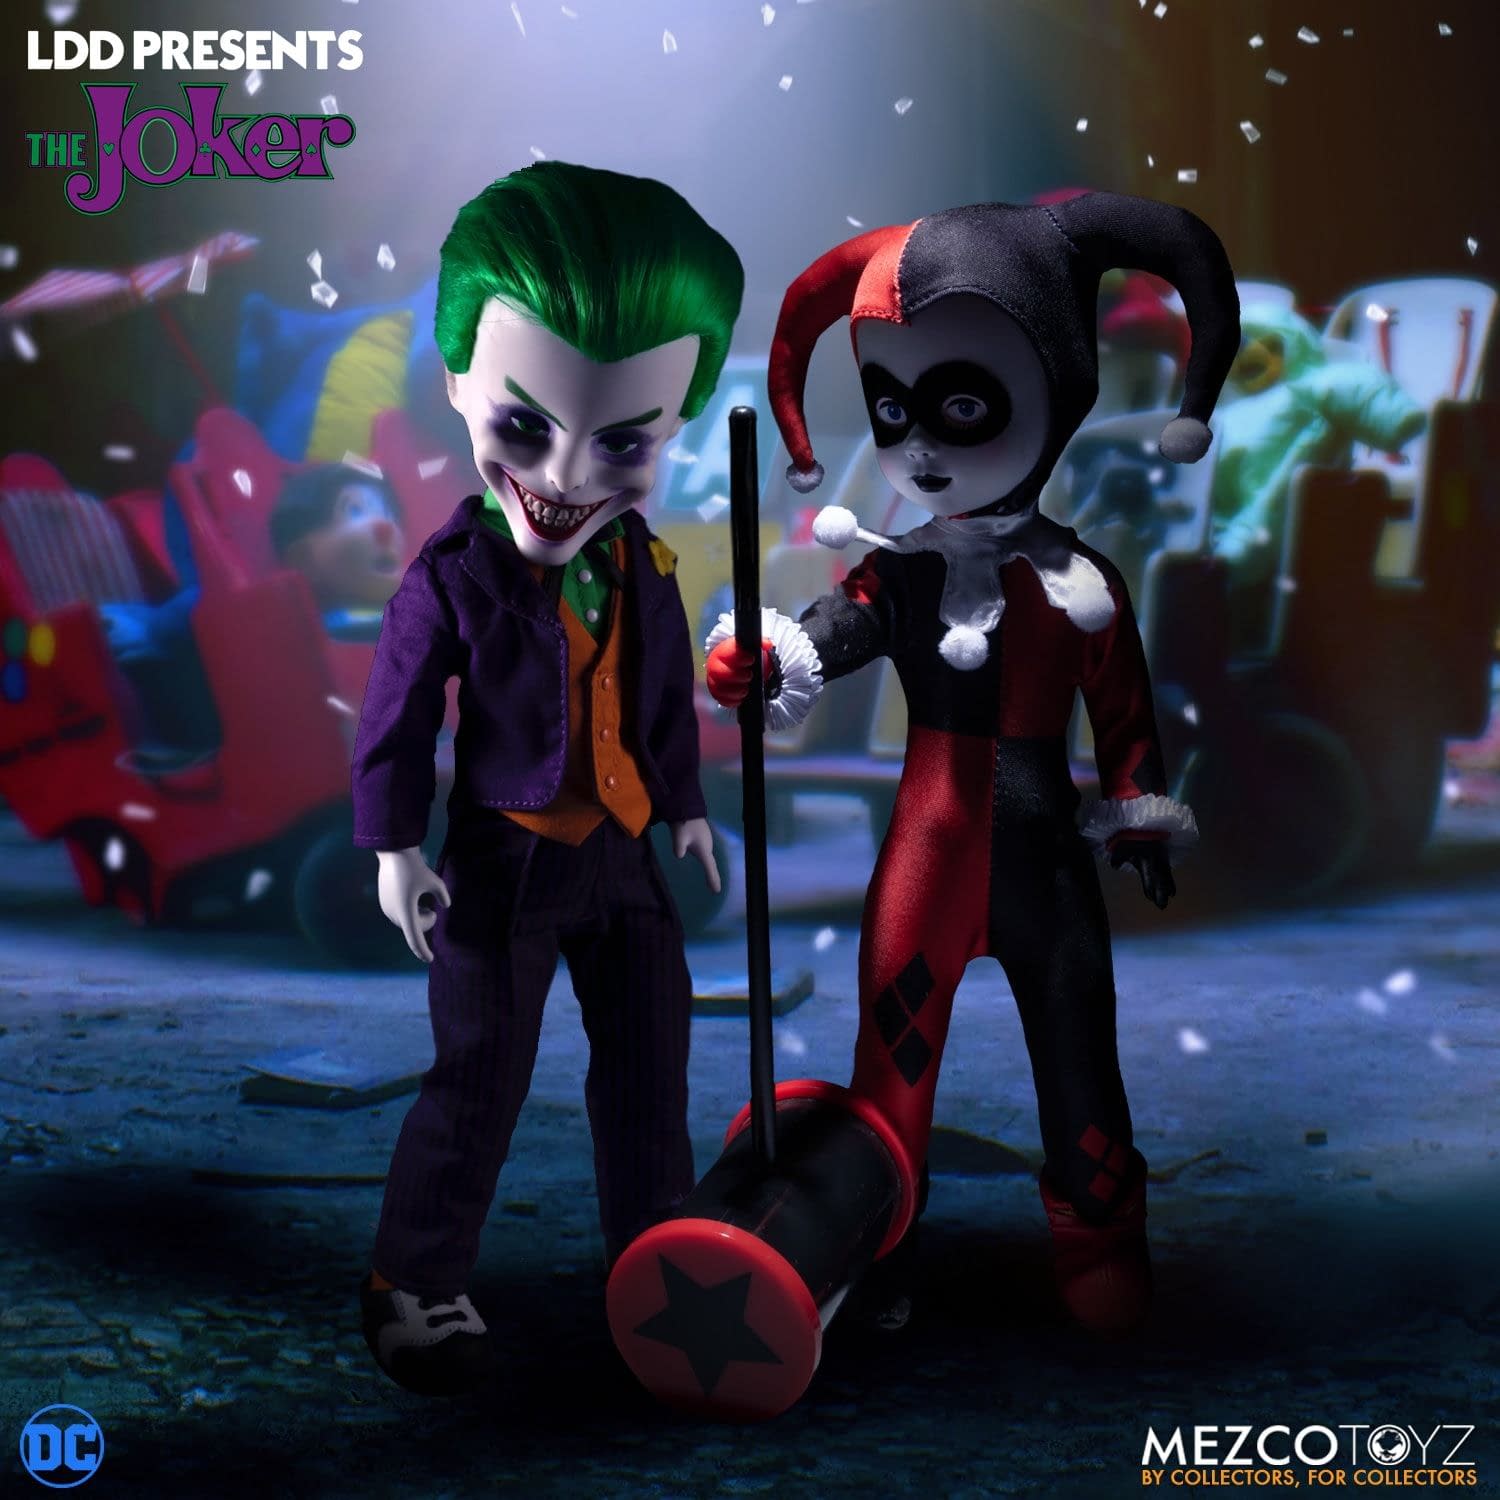 Joker Makes His Arrival in Gotham with New LDD from Mezco